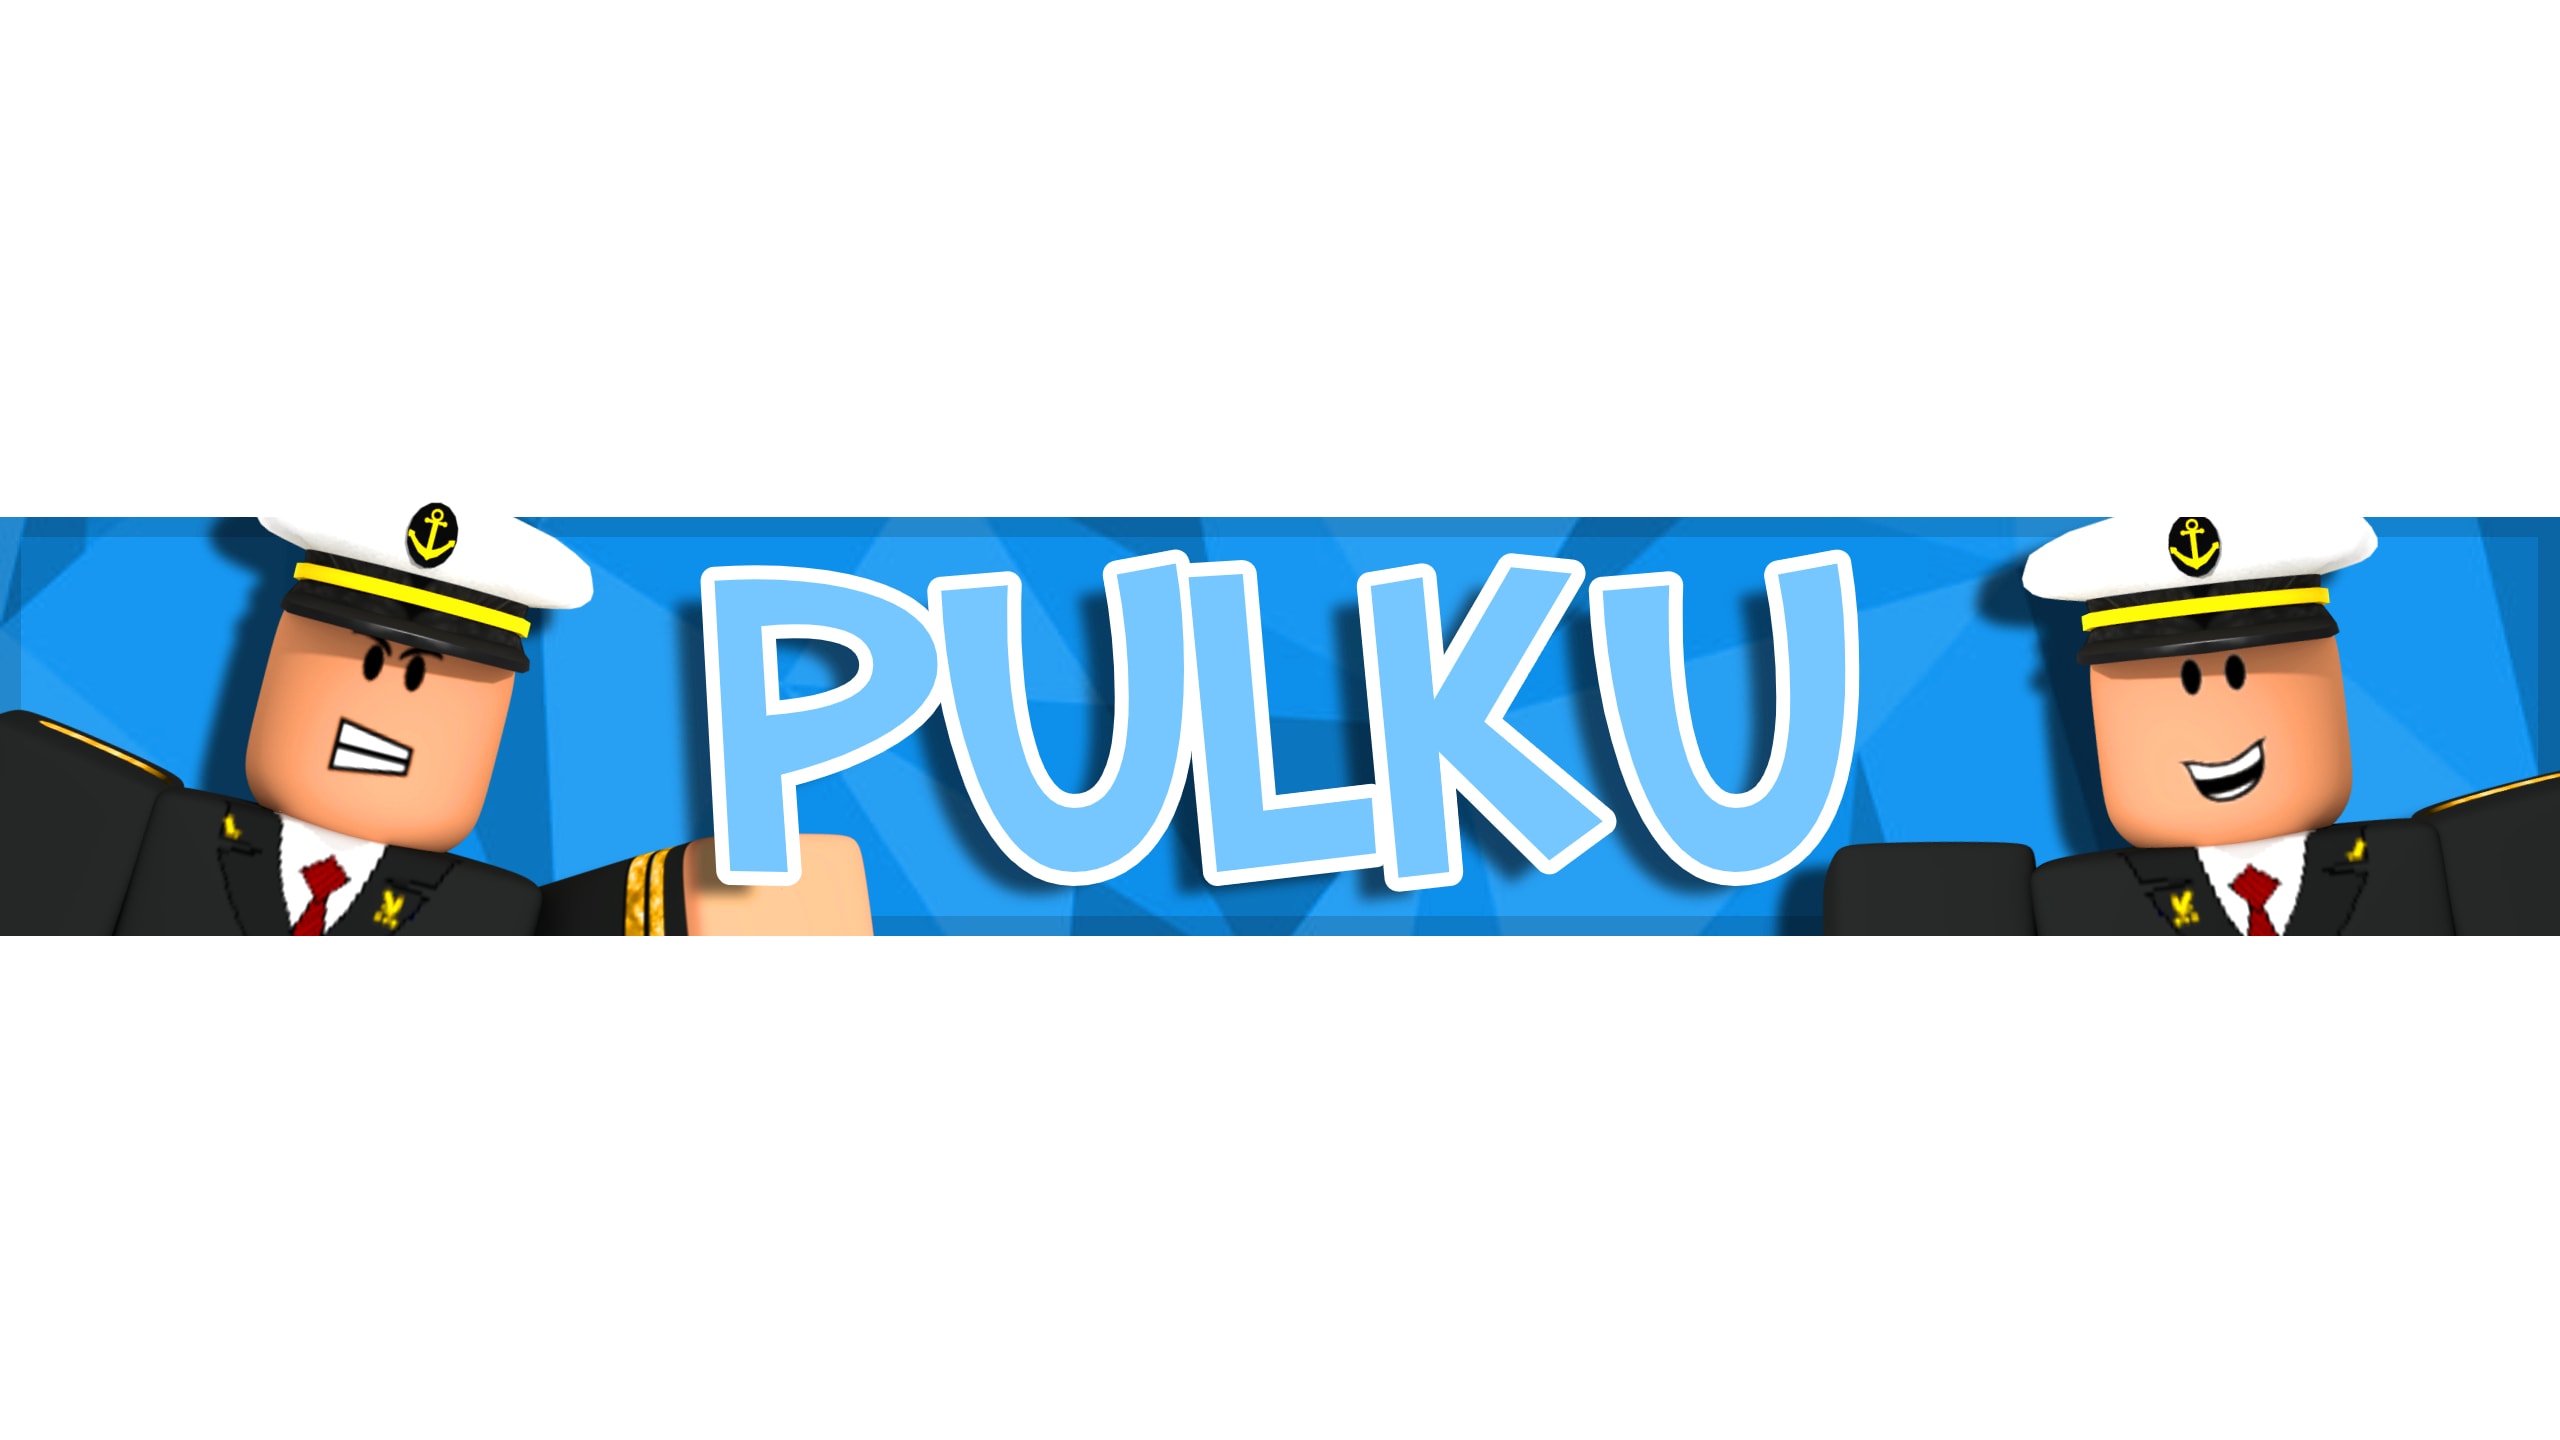 Make You A Custom Gfx Roblox Youtube Banner Or Channel Art By Pulku1 Fiverr - roblox youtube channel profile